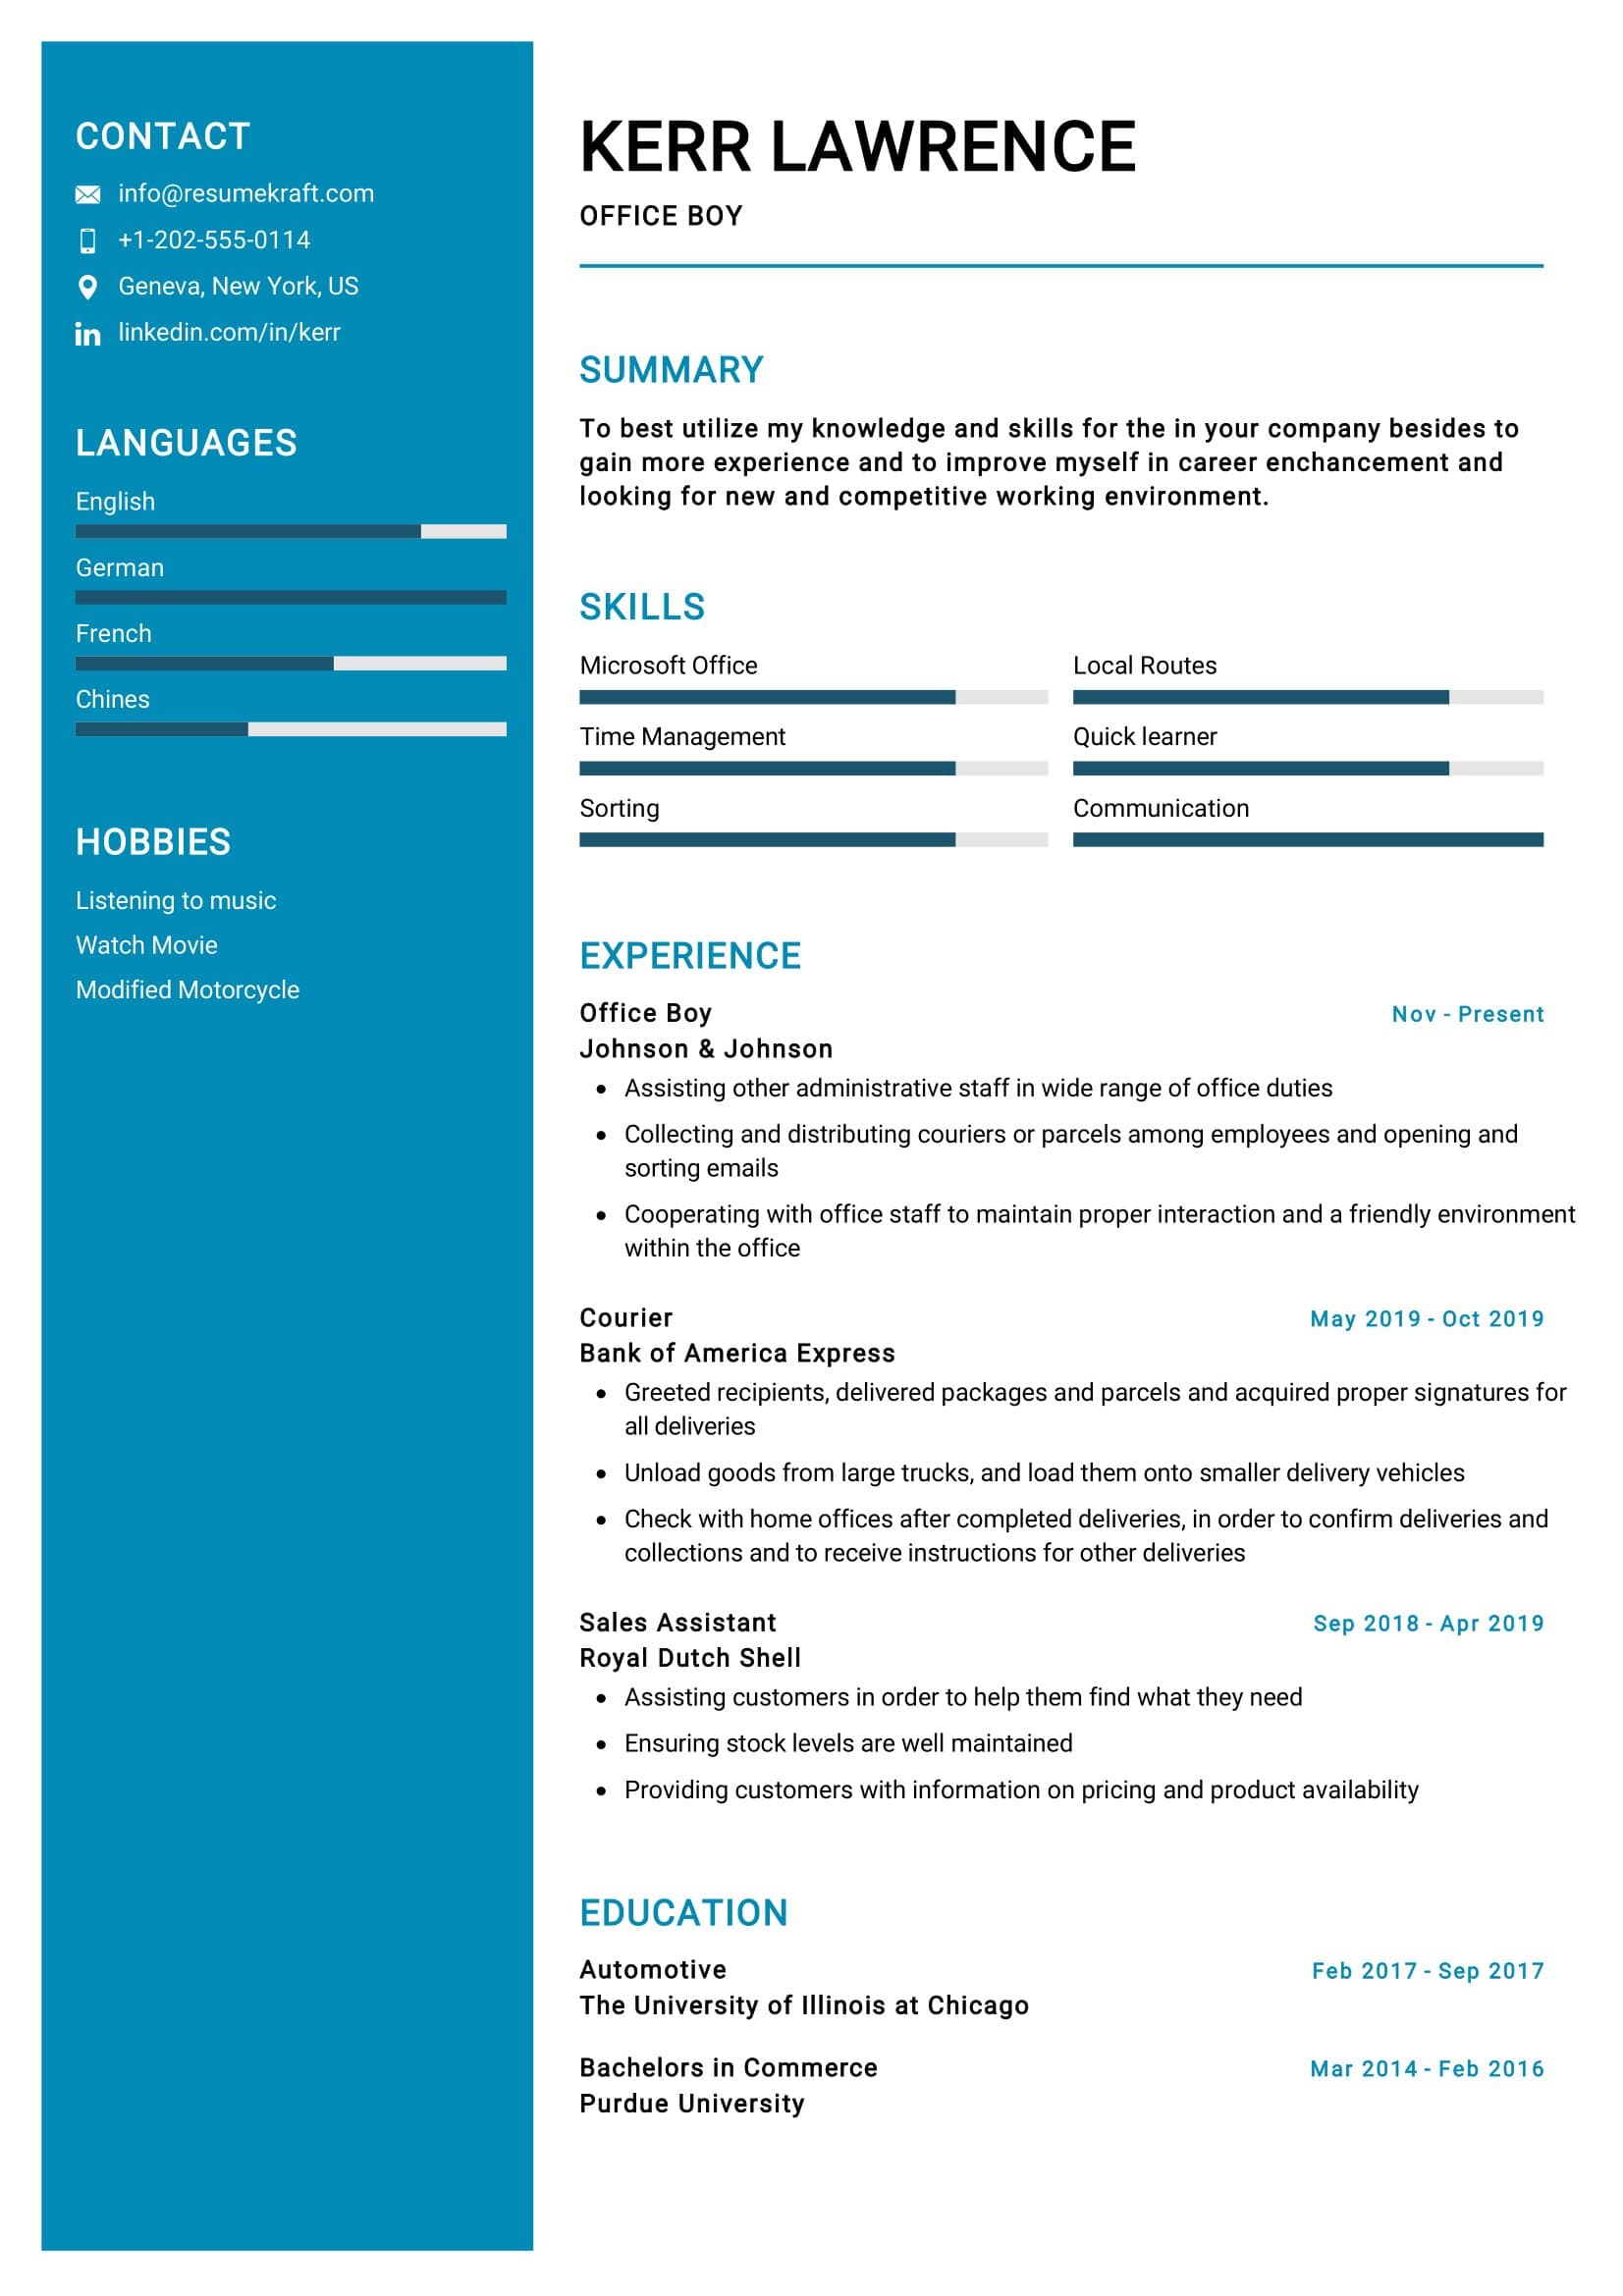 resume format word for office boy  28 images  free 9 sle